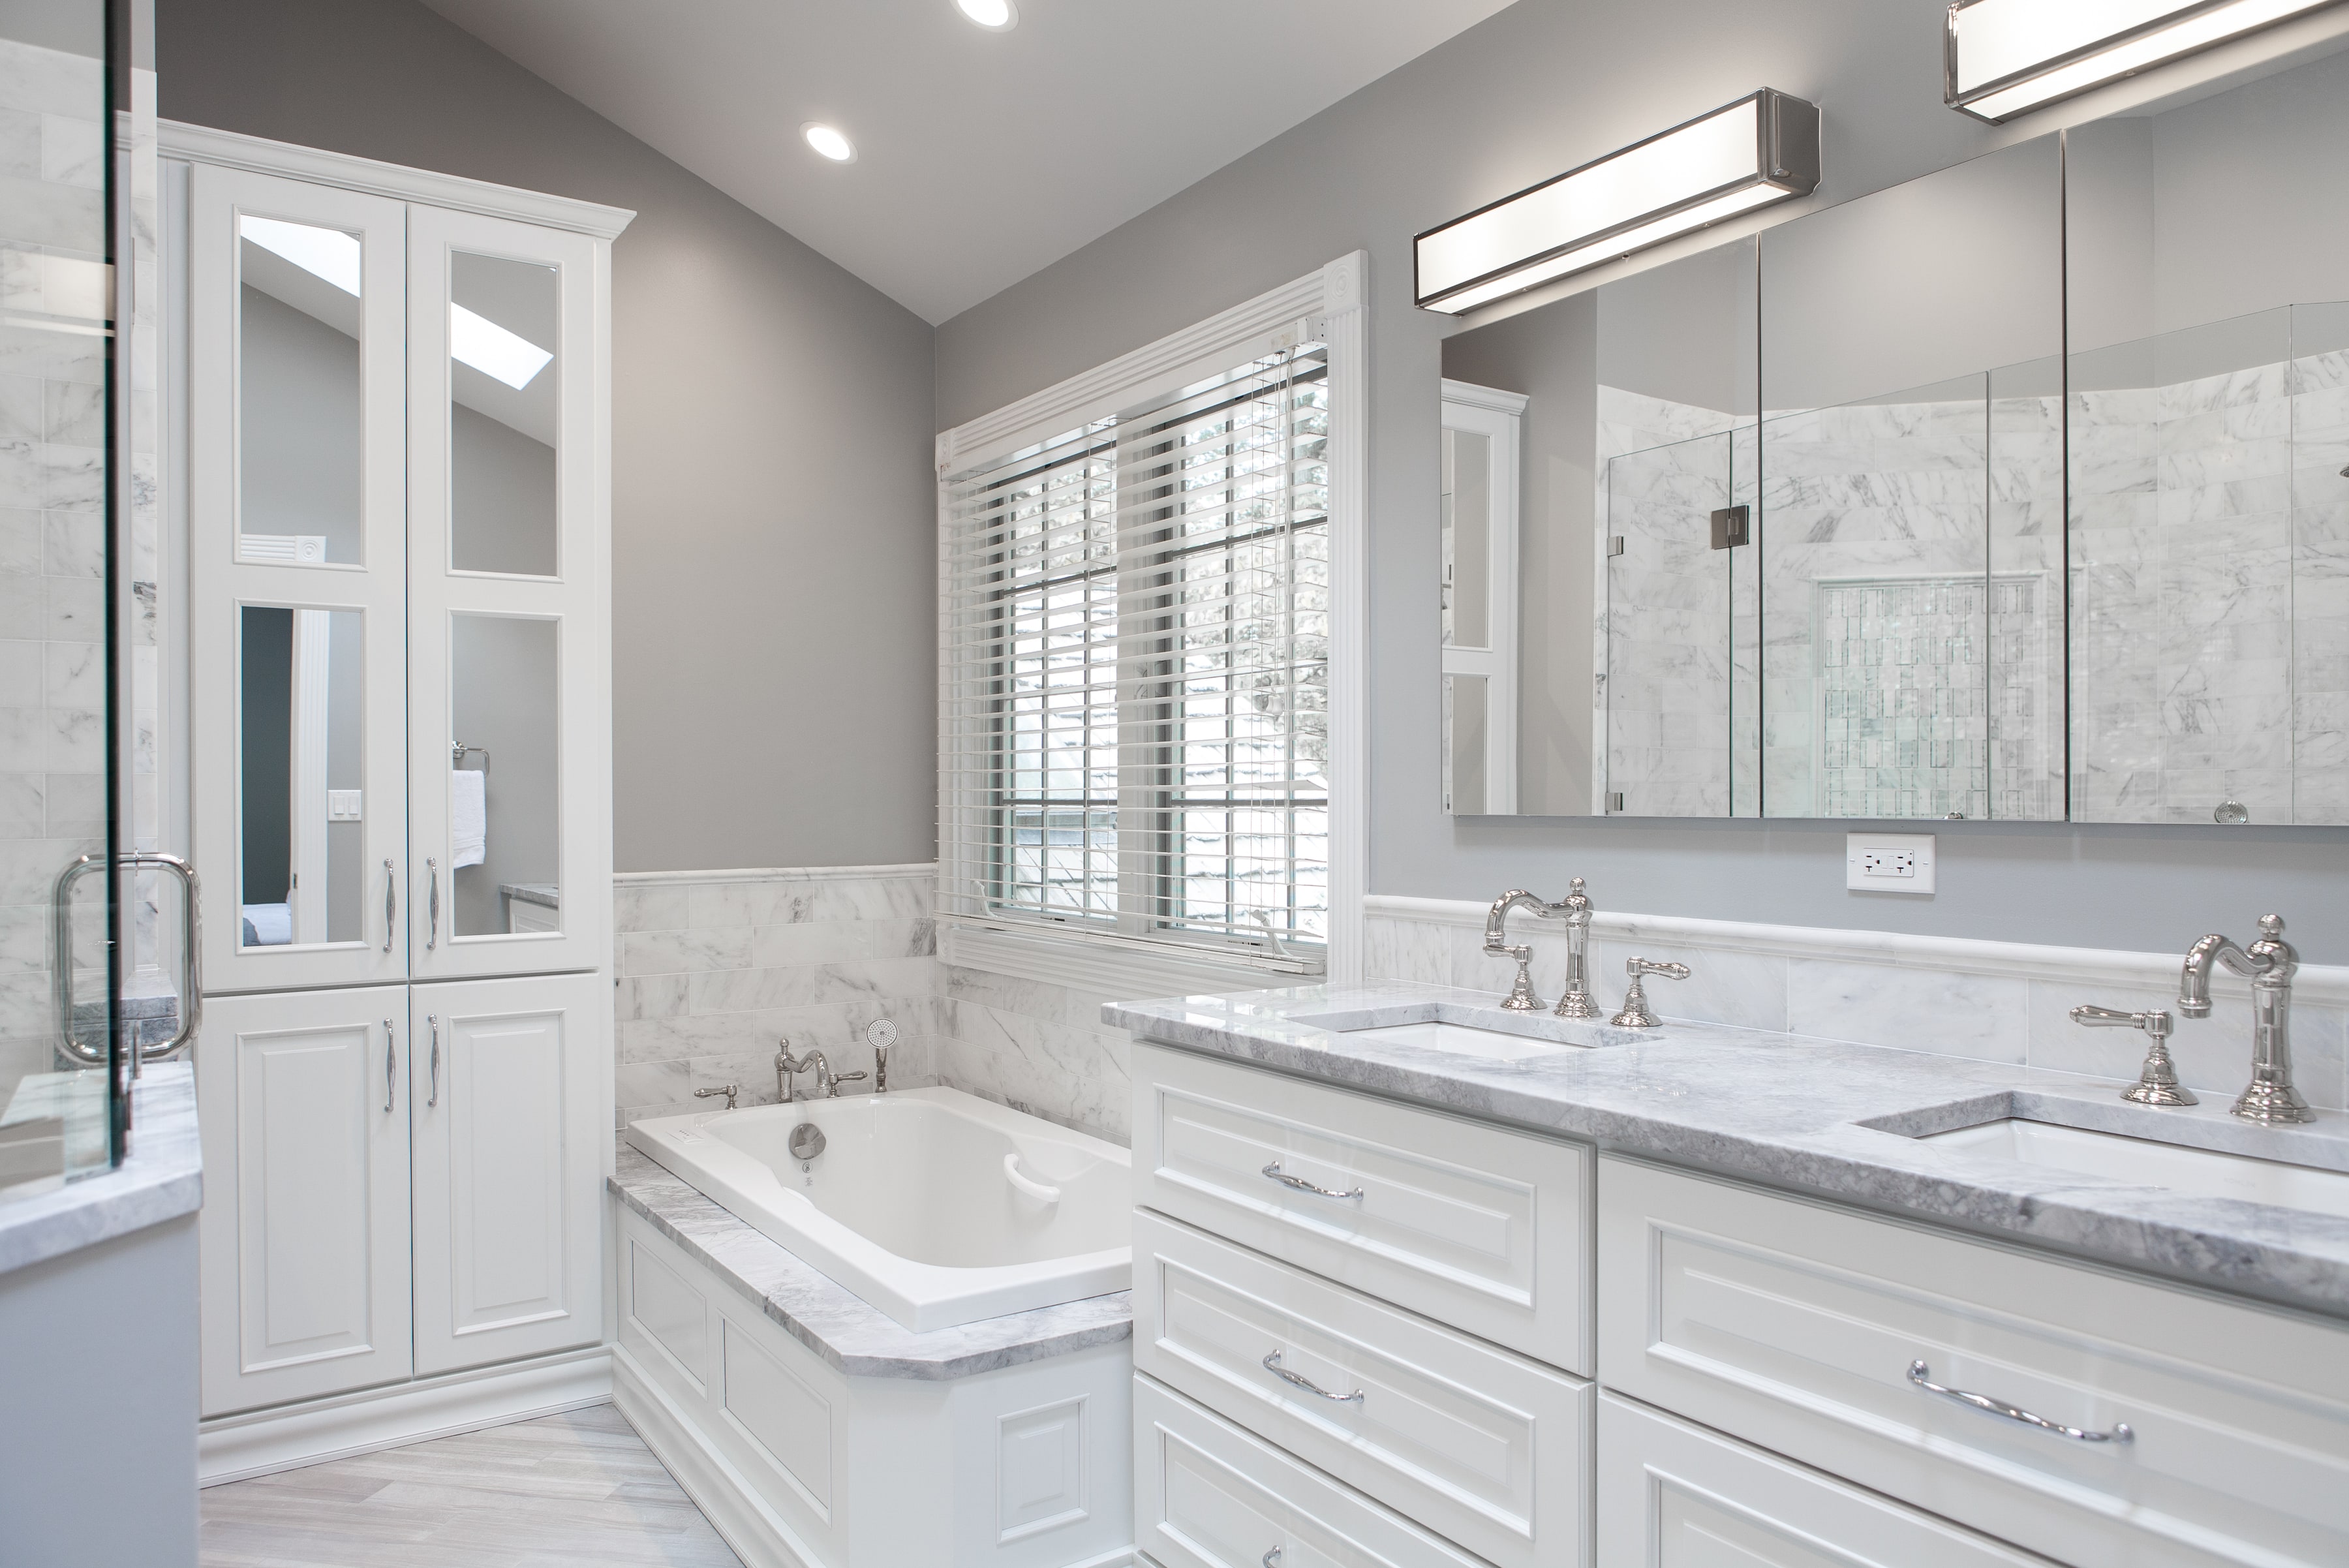 Master Bathroom Remodel Cost - The Beauty Home Design